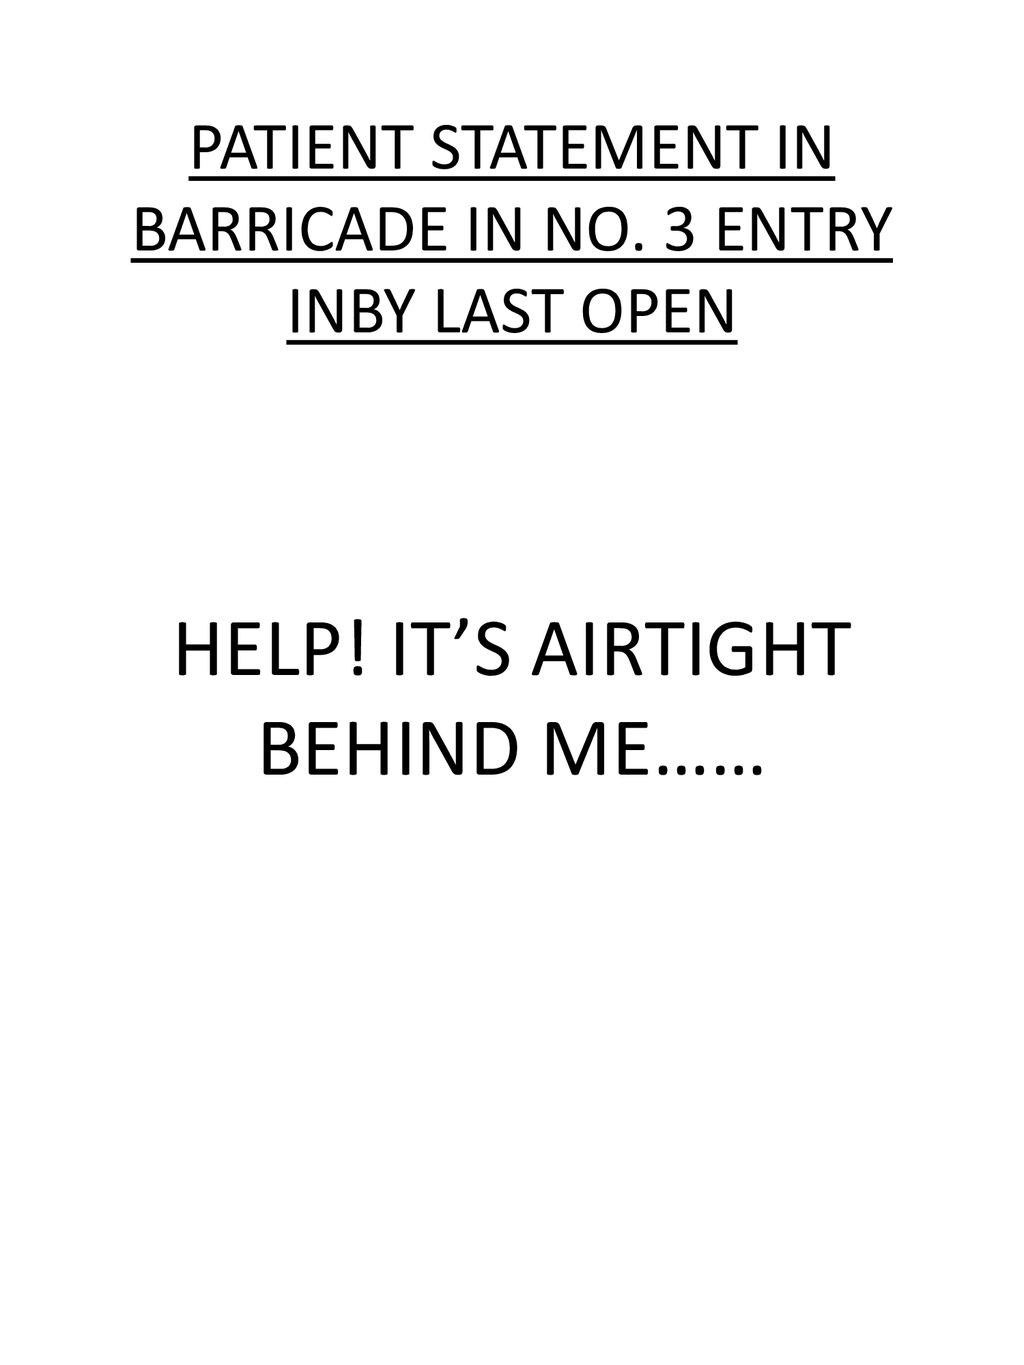 PATIENT STATEMENT IN BARRICADE IN NO. 3 ENTRY INBY LAST OPEN